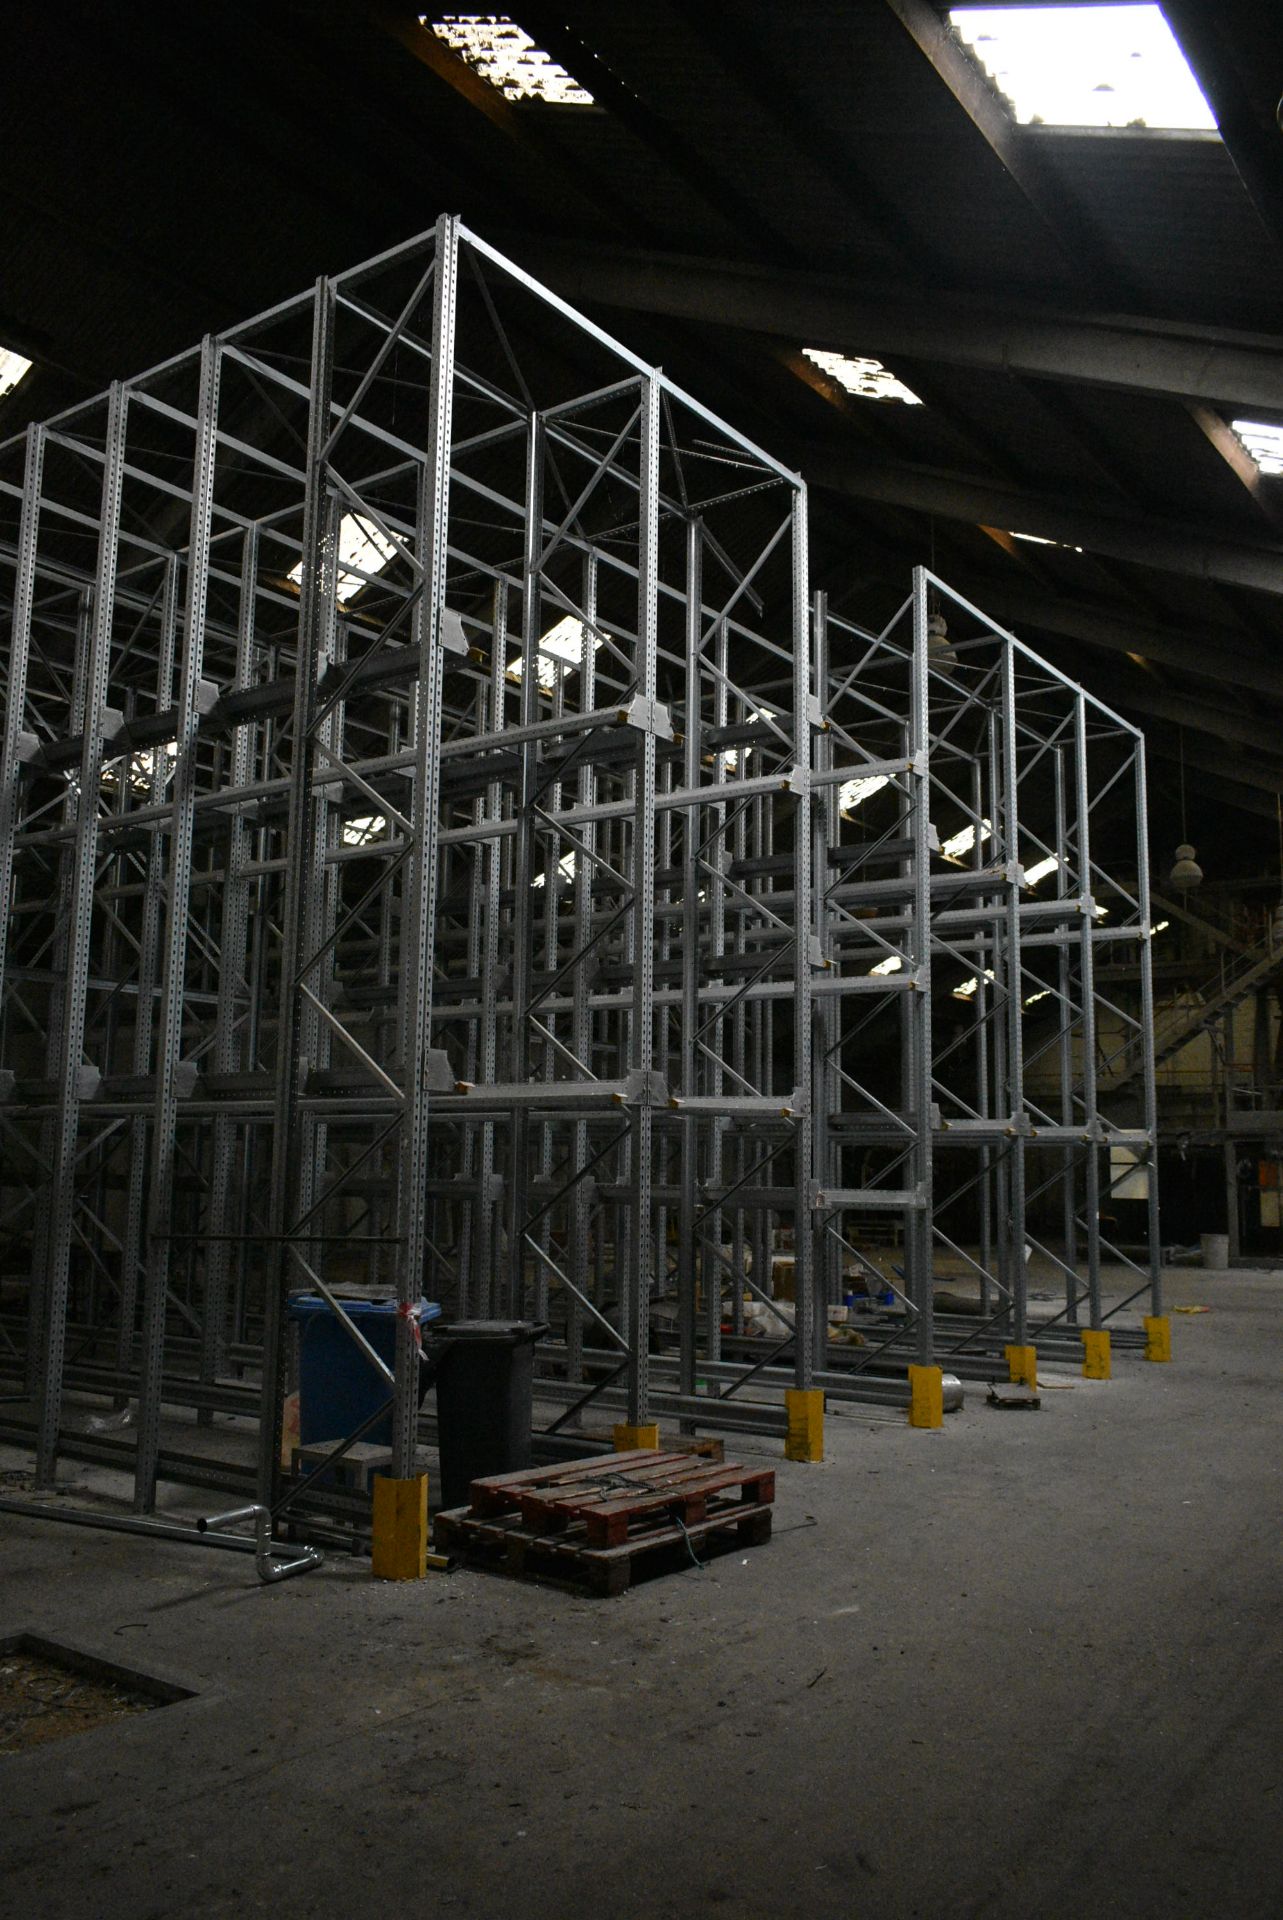 Dexion P90 M SIX BAY THREE TIER DRIVE-IN PALLET RACK, approx. 10m x 10.8m x 6m high overall, for - Image 2 of 6